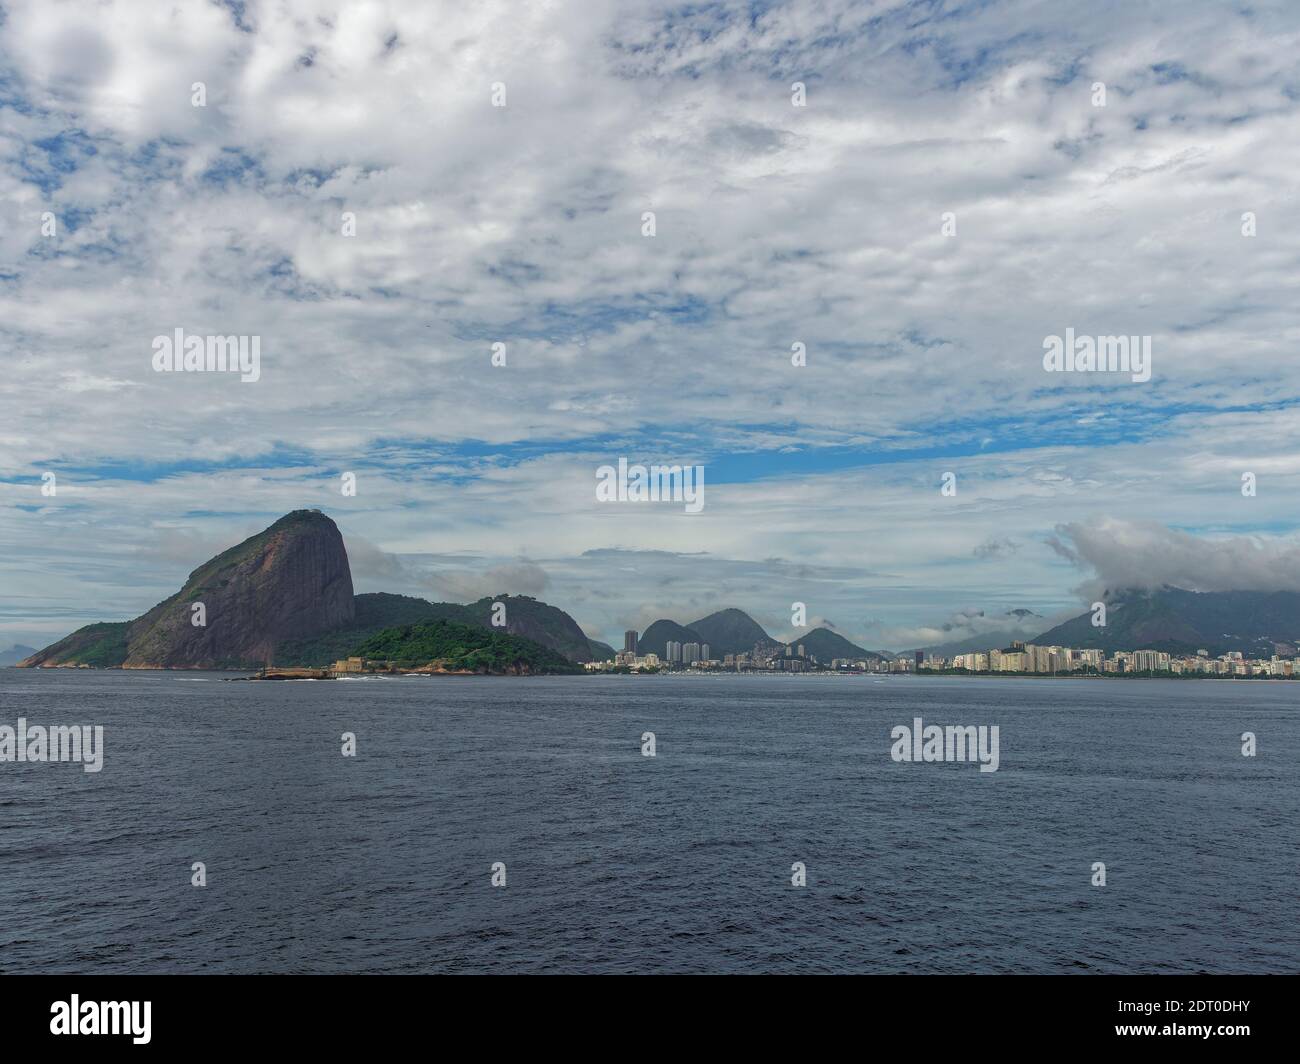 Copacabana beach, its Fort and the dramatic Pedra da Gavea Mountain seen from a Vessel heading into Rio Old Port. Stock Photo